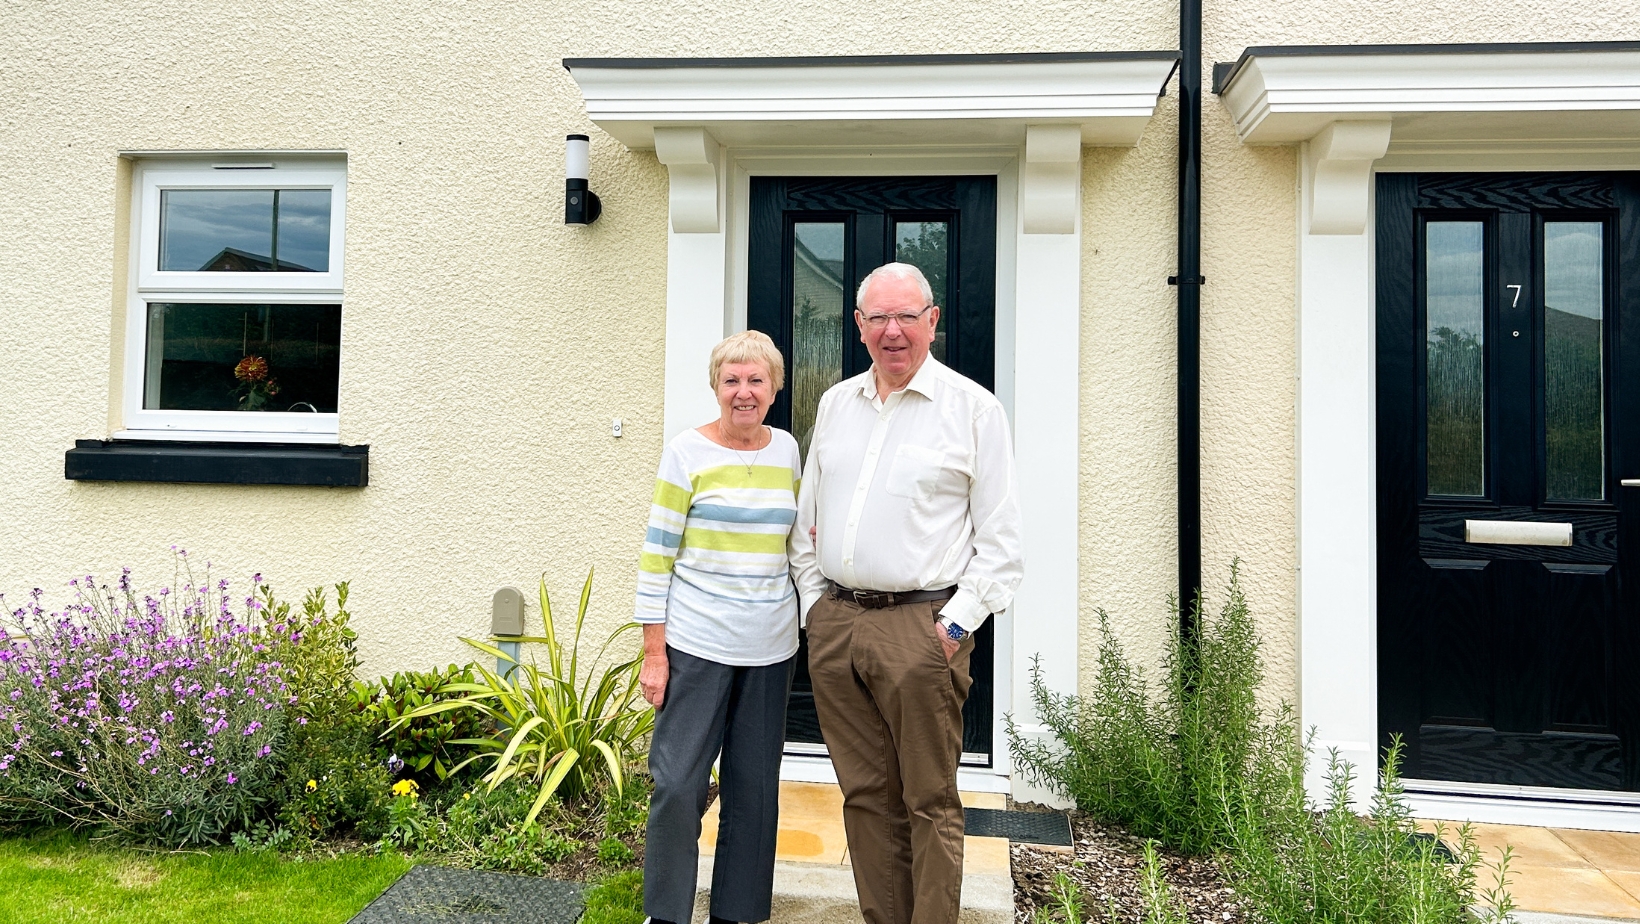 Home Exchange took all the stress out of moving says downsizers at Estuary View in Appledore